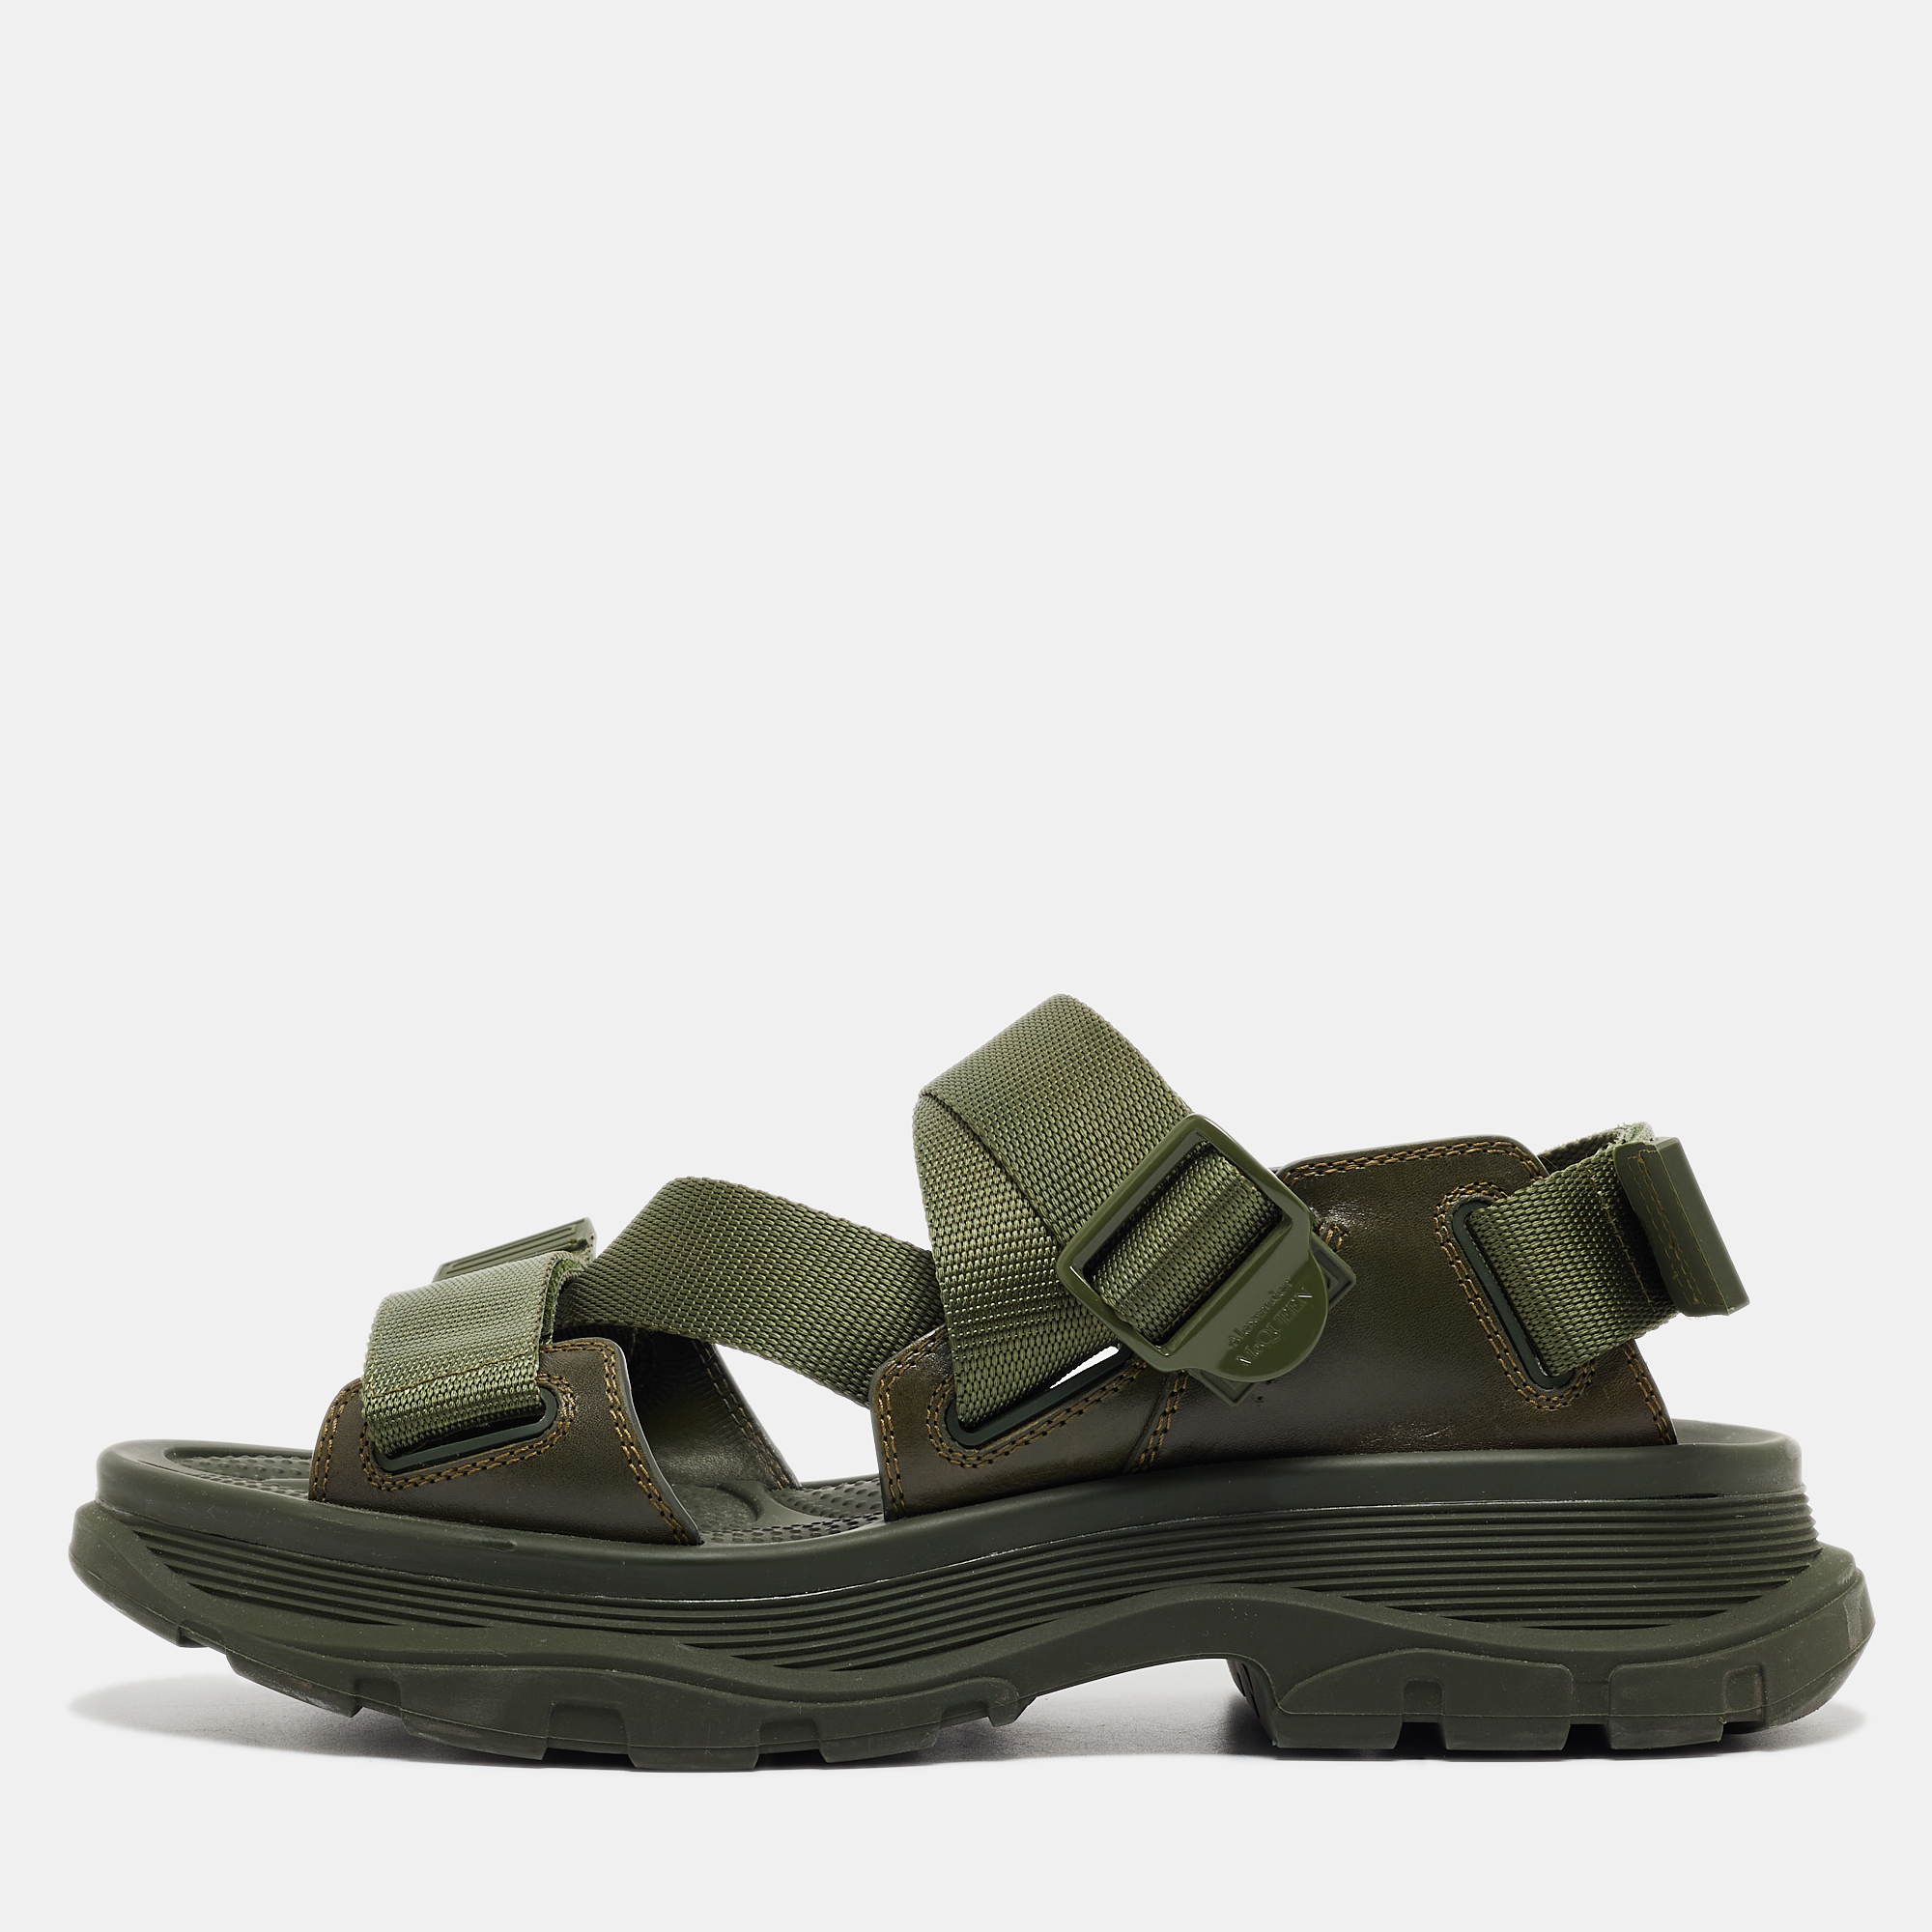 Pre-owned Alexander Mcqueen Military Green Nylon Tread Flat Sandals Size 43